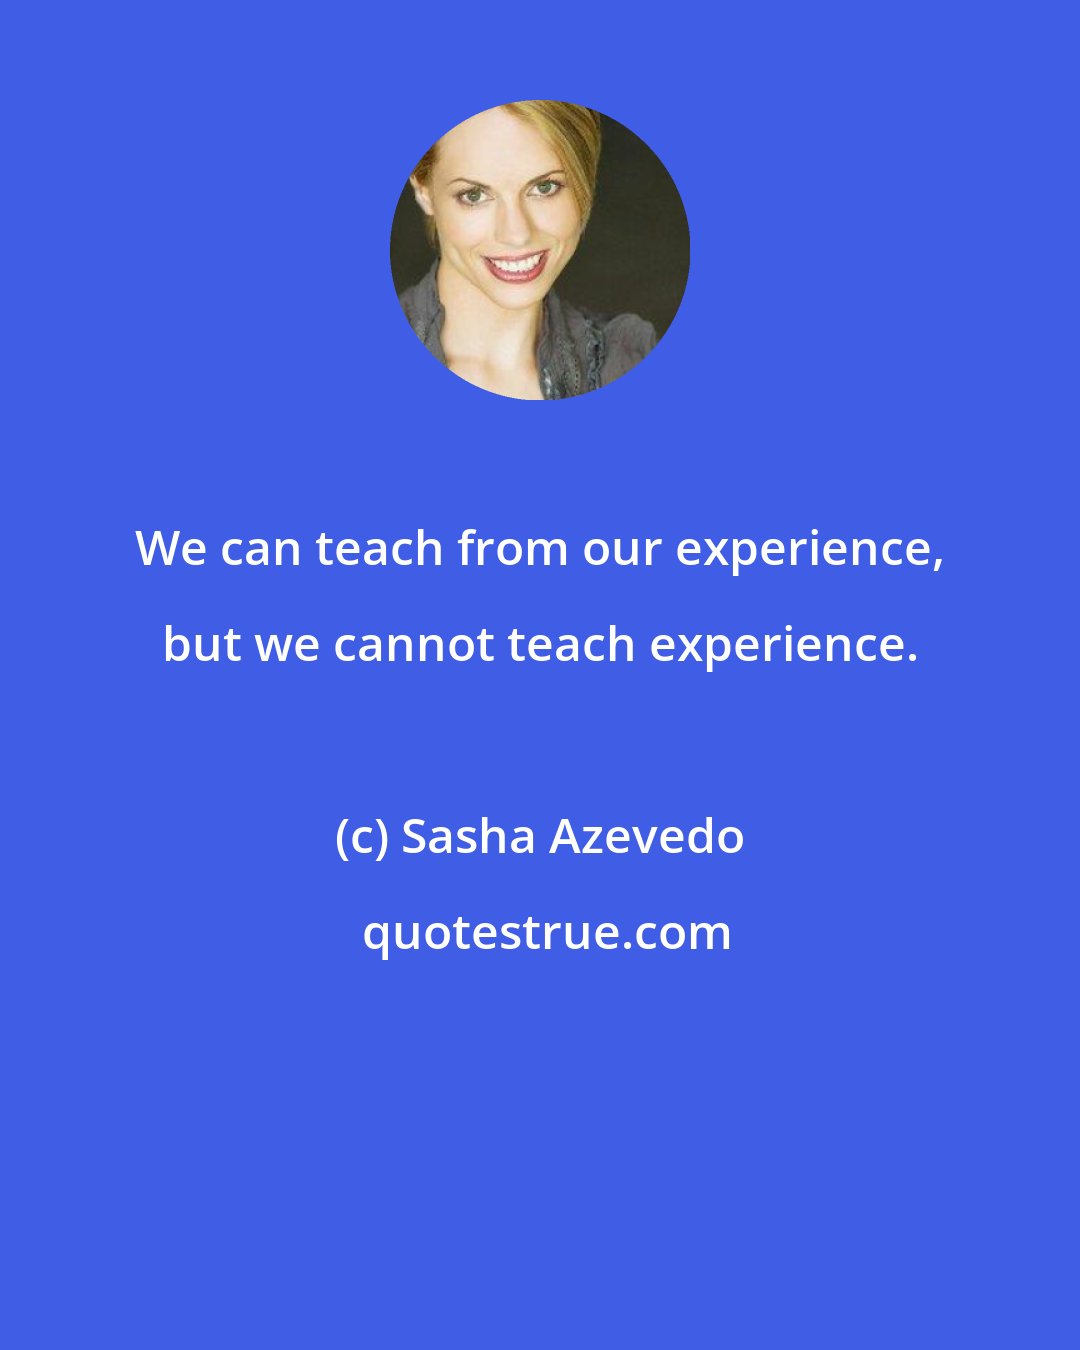 Sasha Azevedo: We can teach from our experience, but we cannot teach experience.